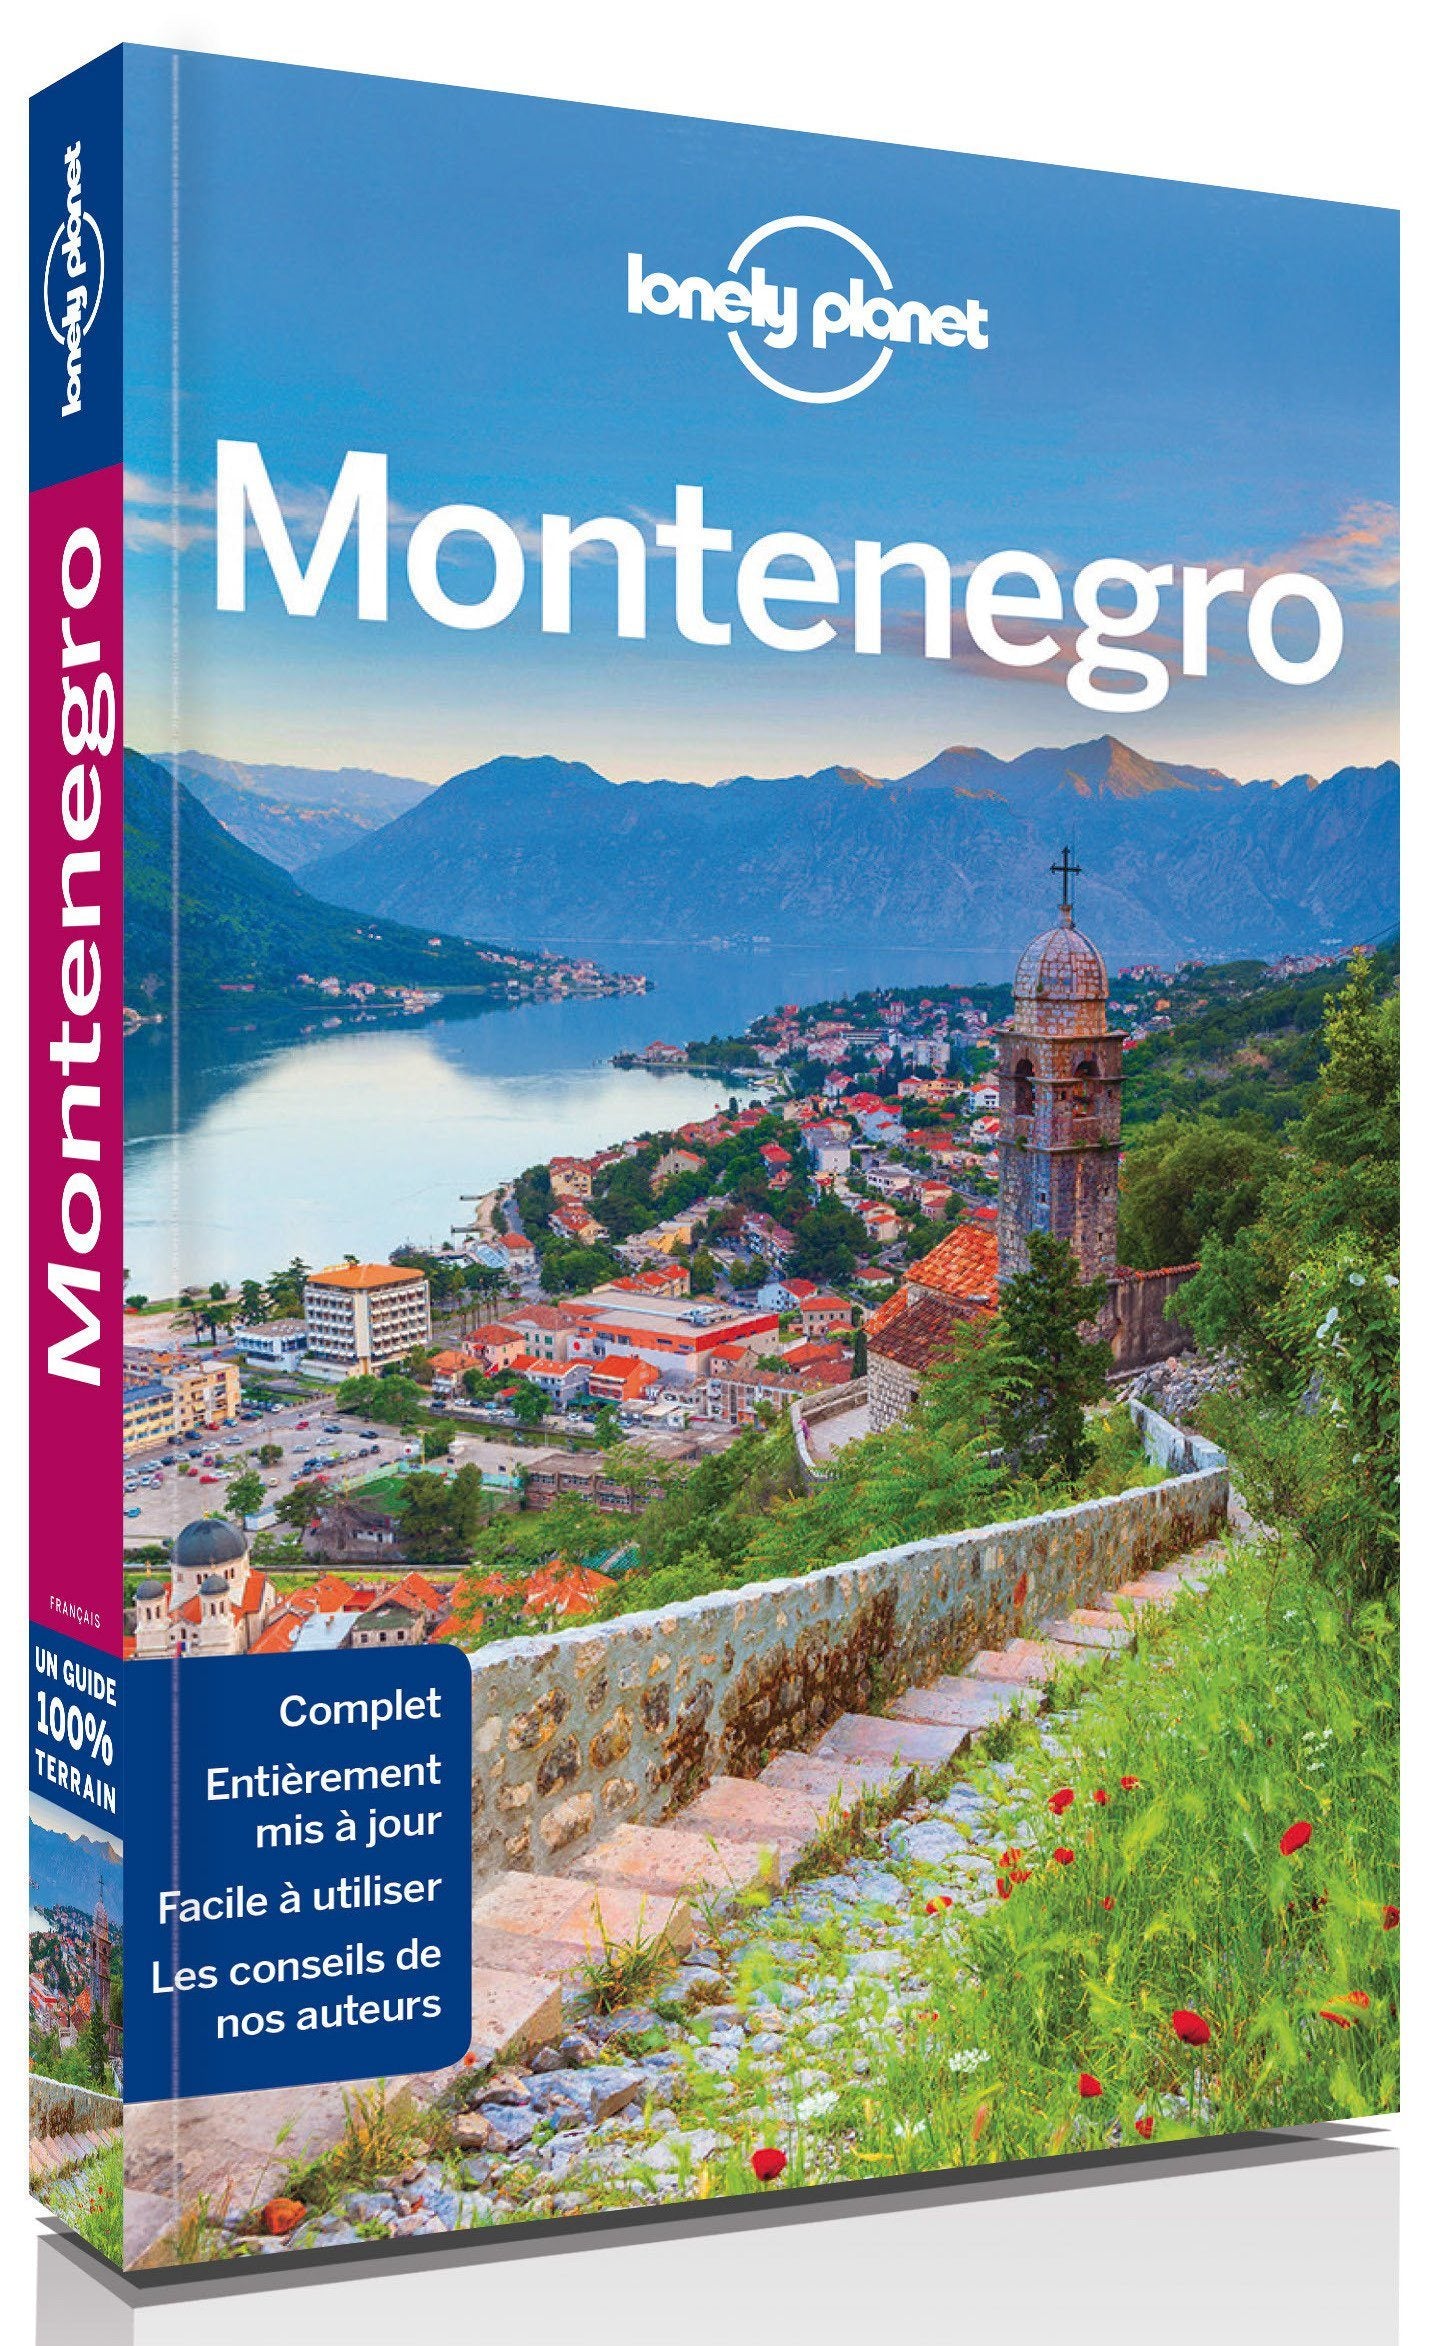 hiking　and　Montenegro　(French)　Lonely　Travel　MapsCompany　Planet　–　Guide　Travel　maps